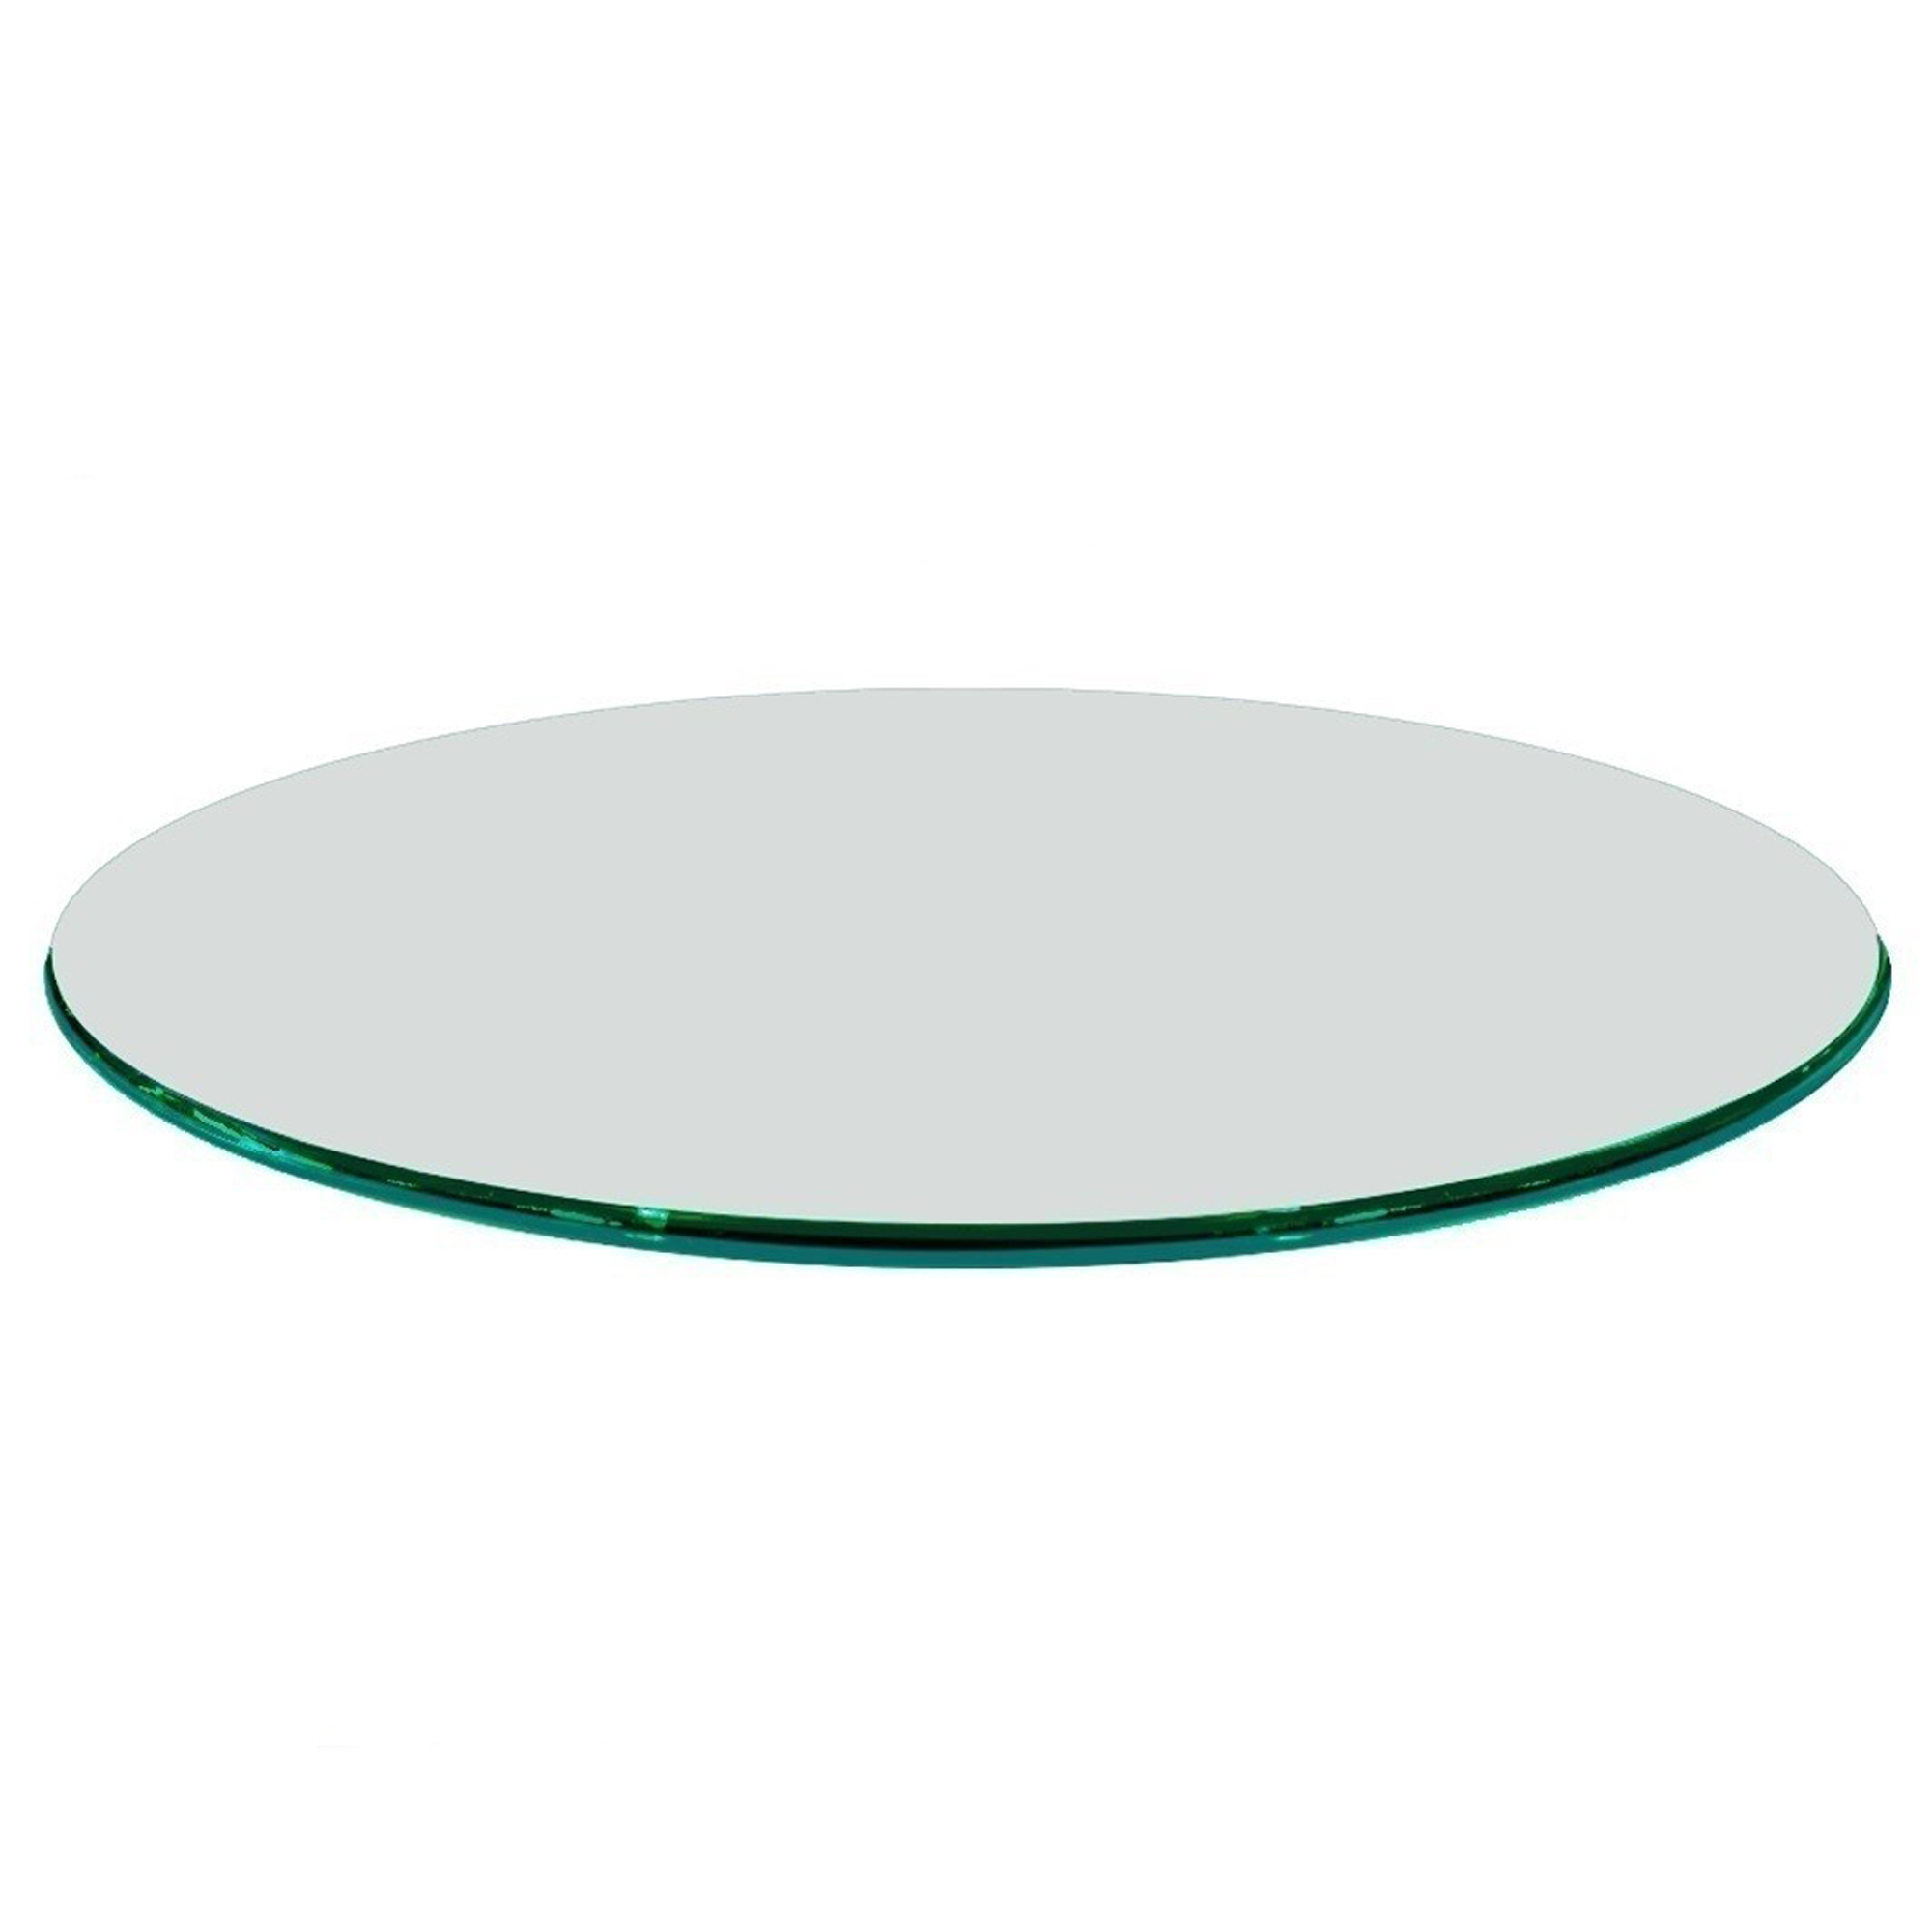 Glass Table Tops Cover, 48 Inch Round Glass Table Top Protector